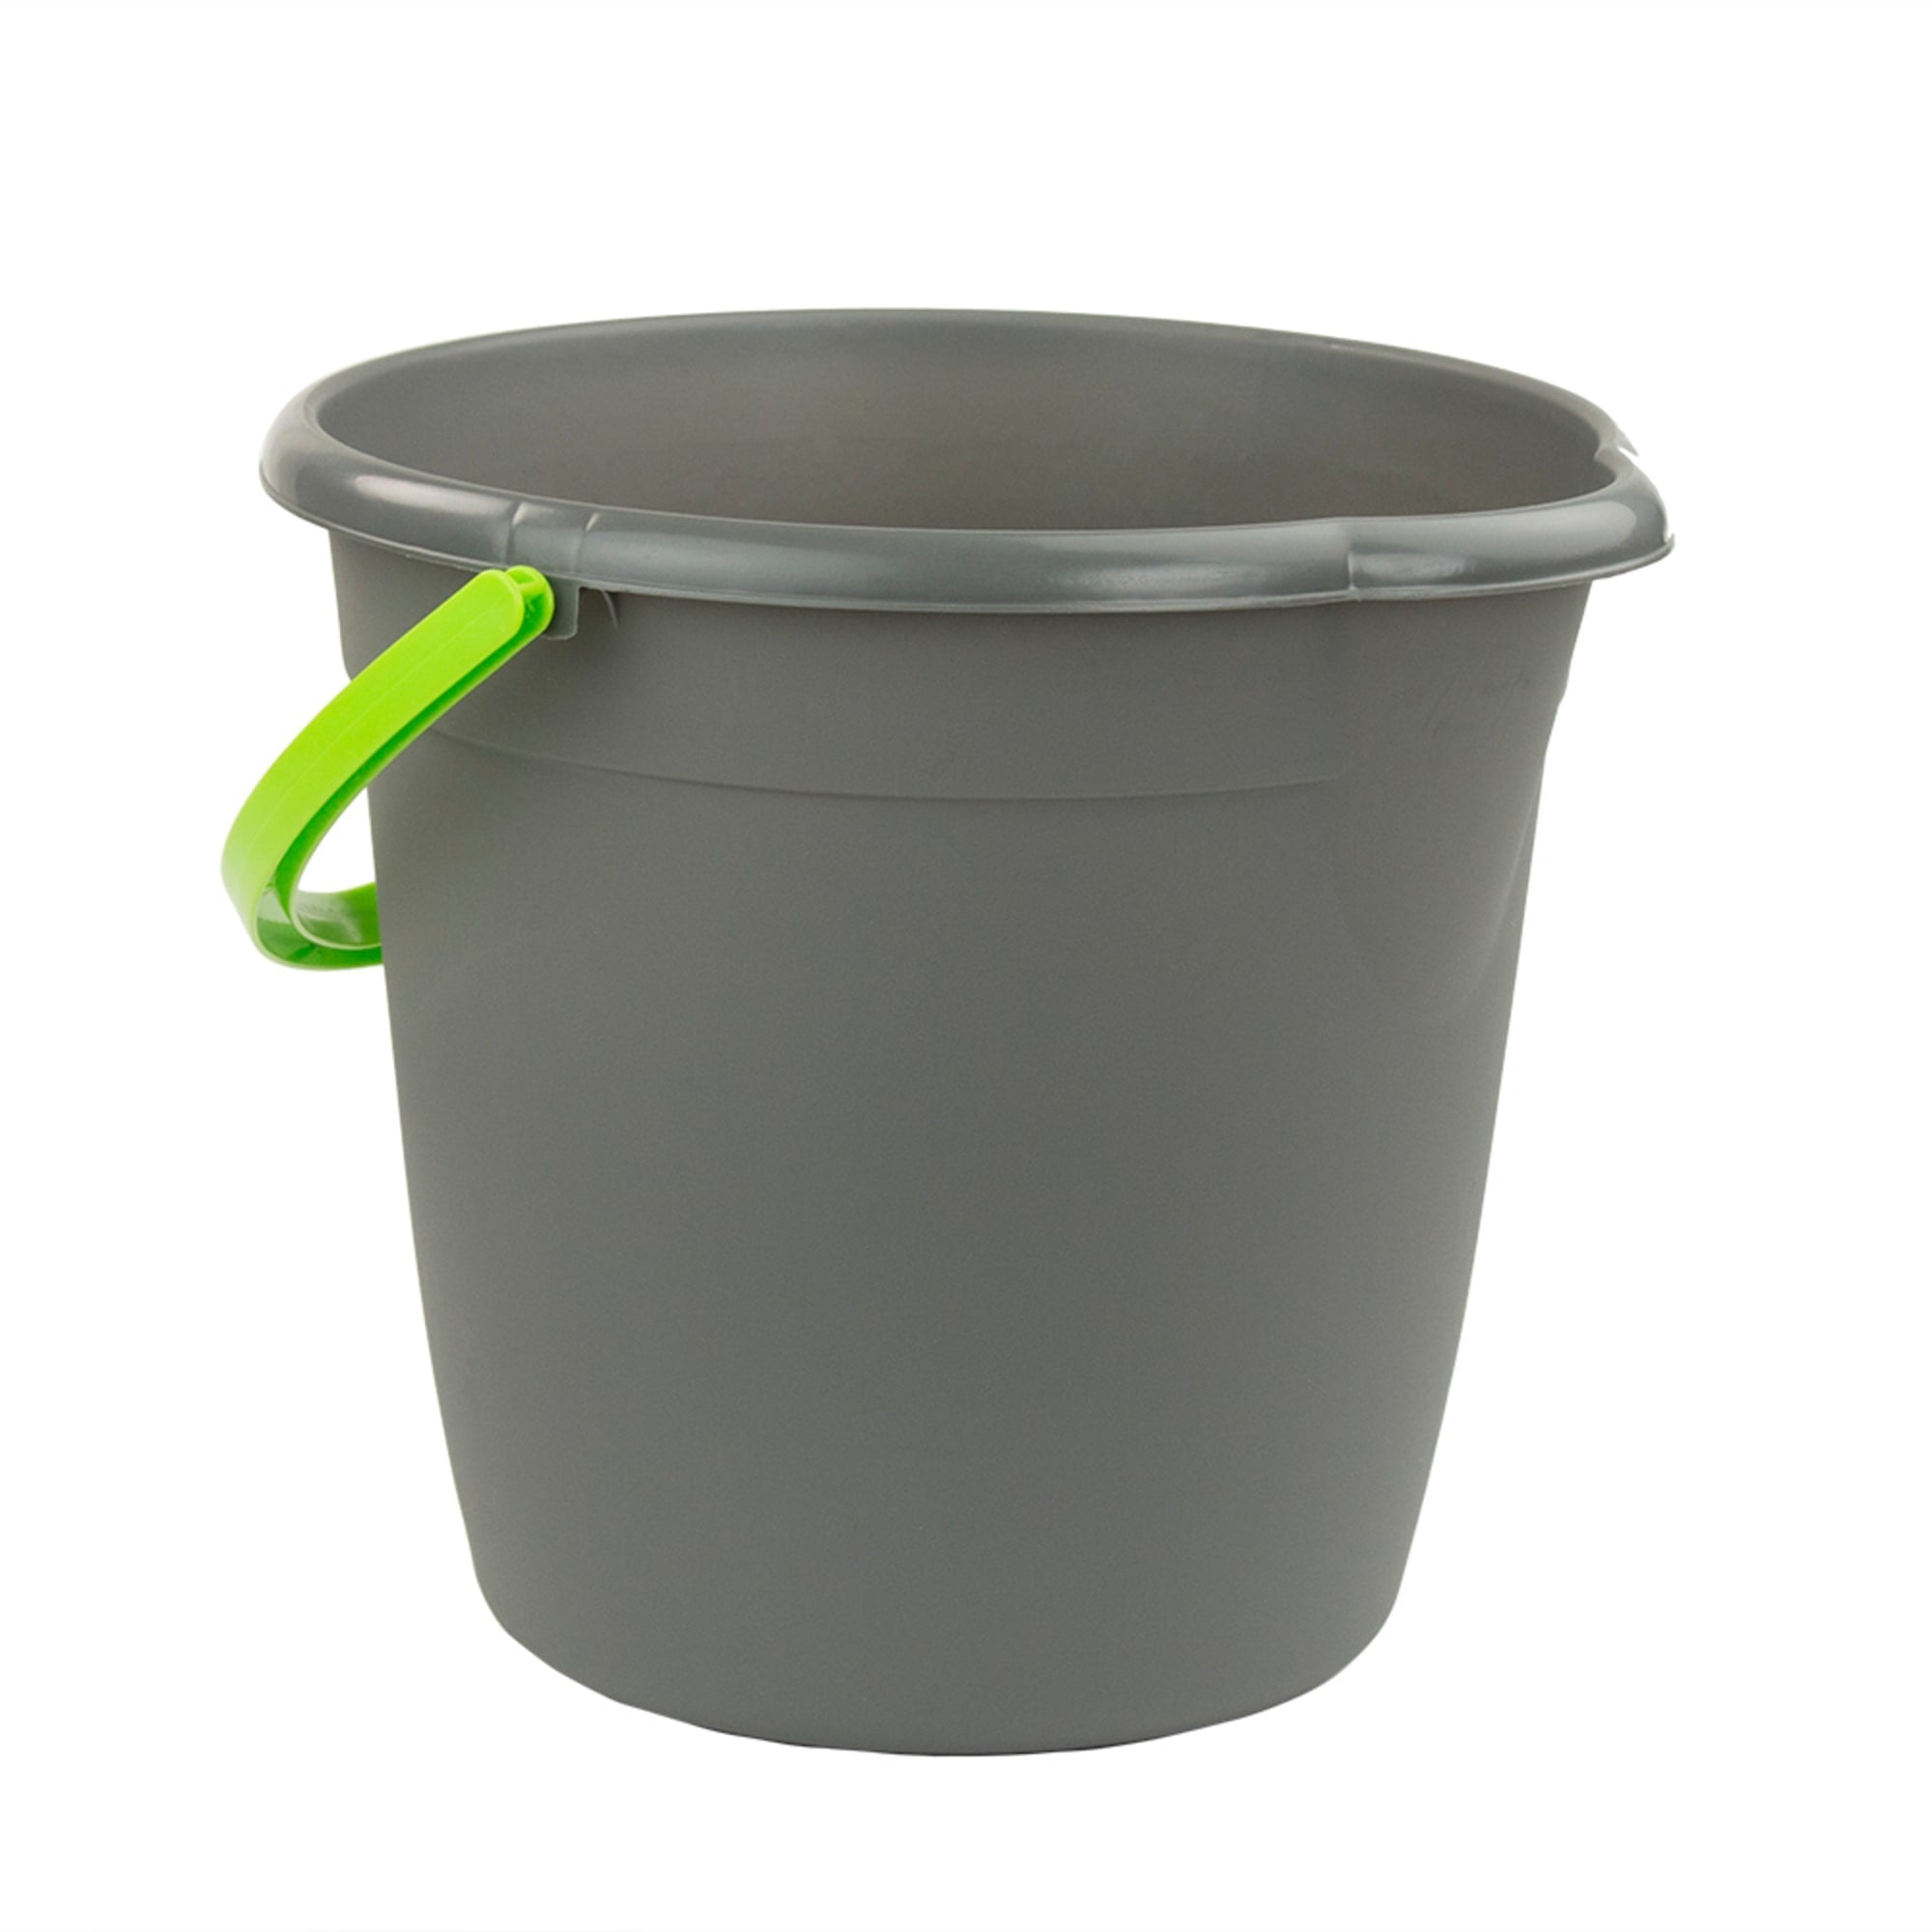 Home Basics Brilliant 9.5 Lt Cleaning Bucket, Grey/Lime $3.00 EACH, CASE PACK OF 12